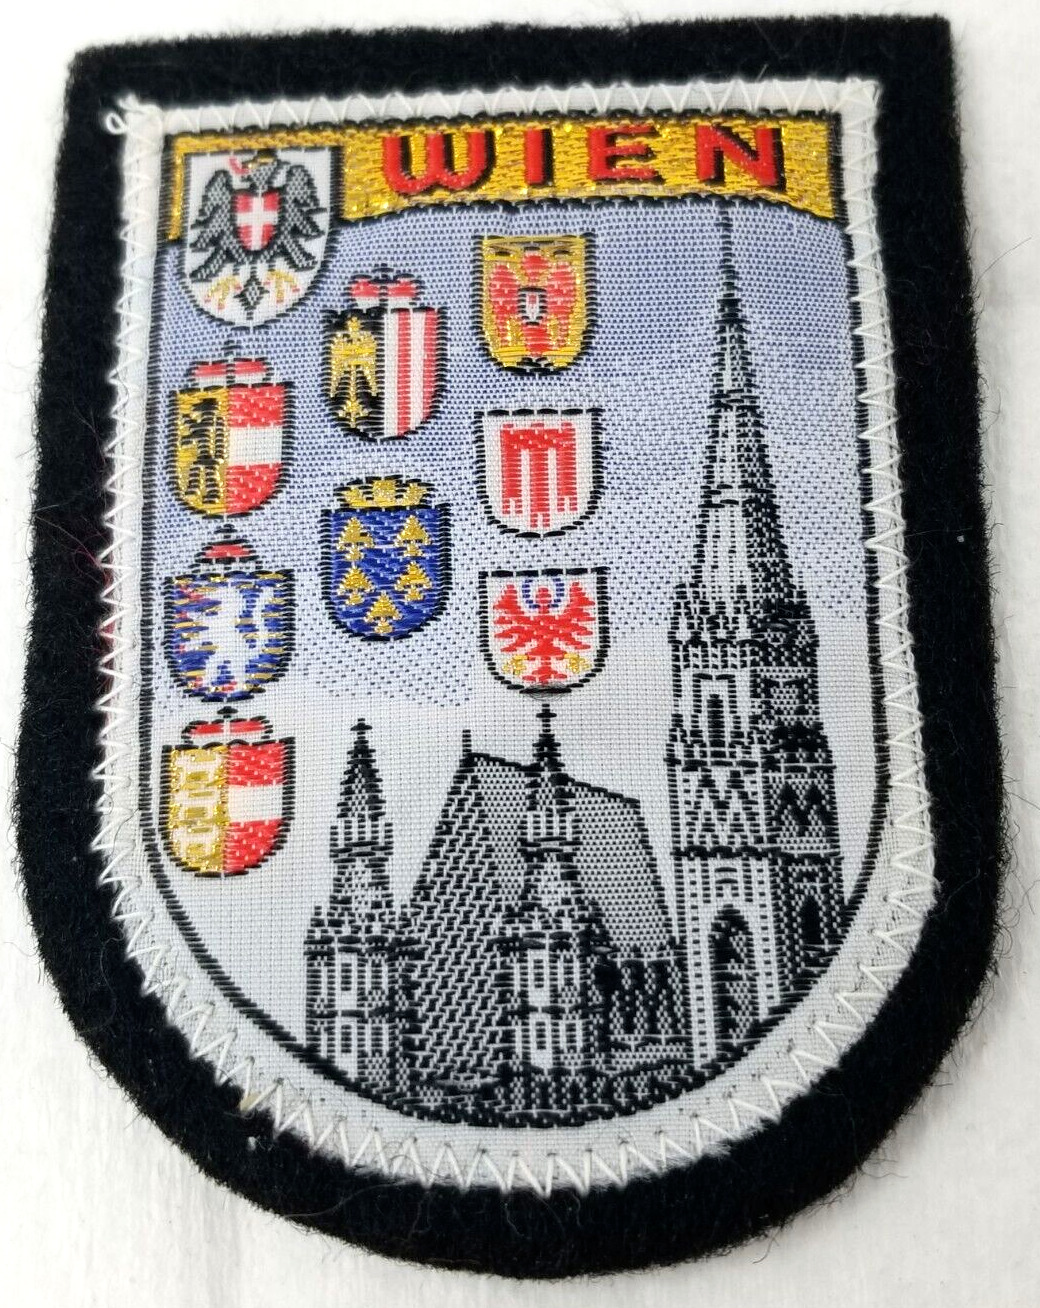 Austria Wien St. Stephen\'s Cathedral Patch Shield Coat of Arms Yellow Red 1970s